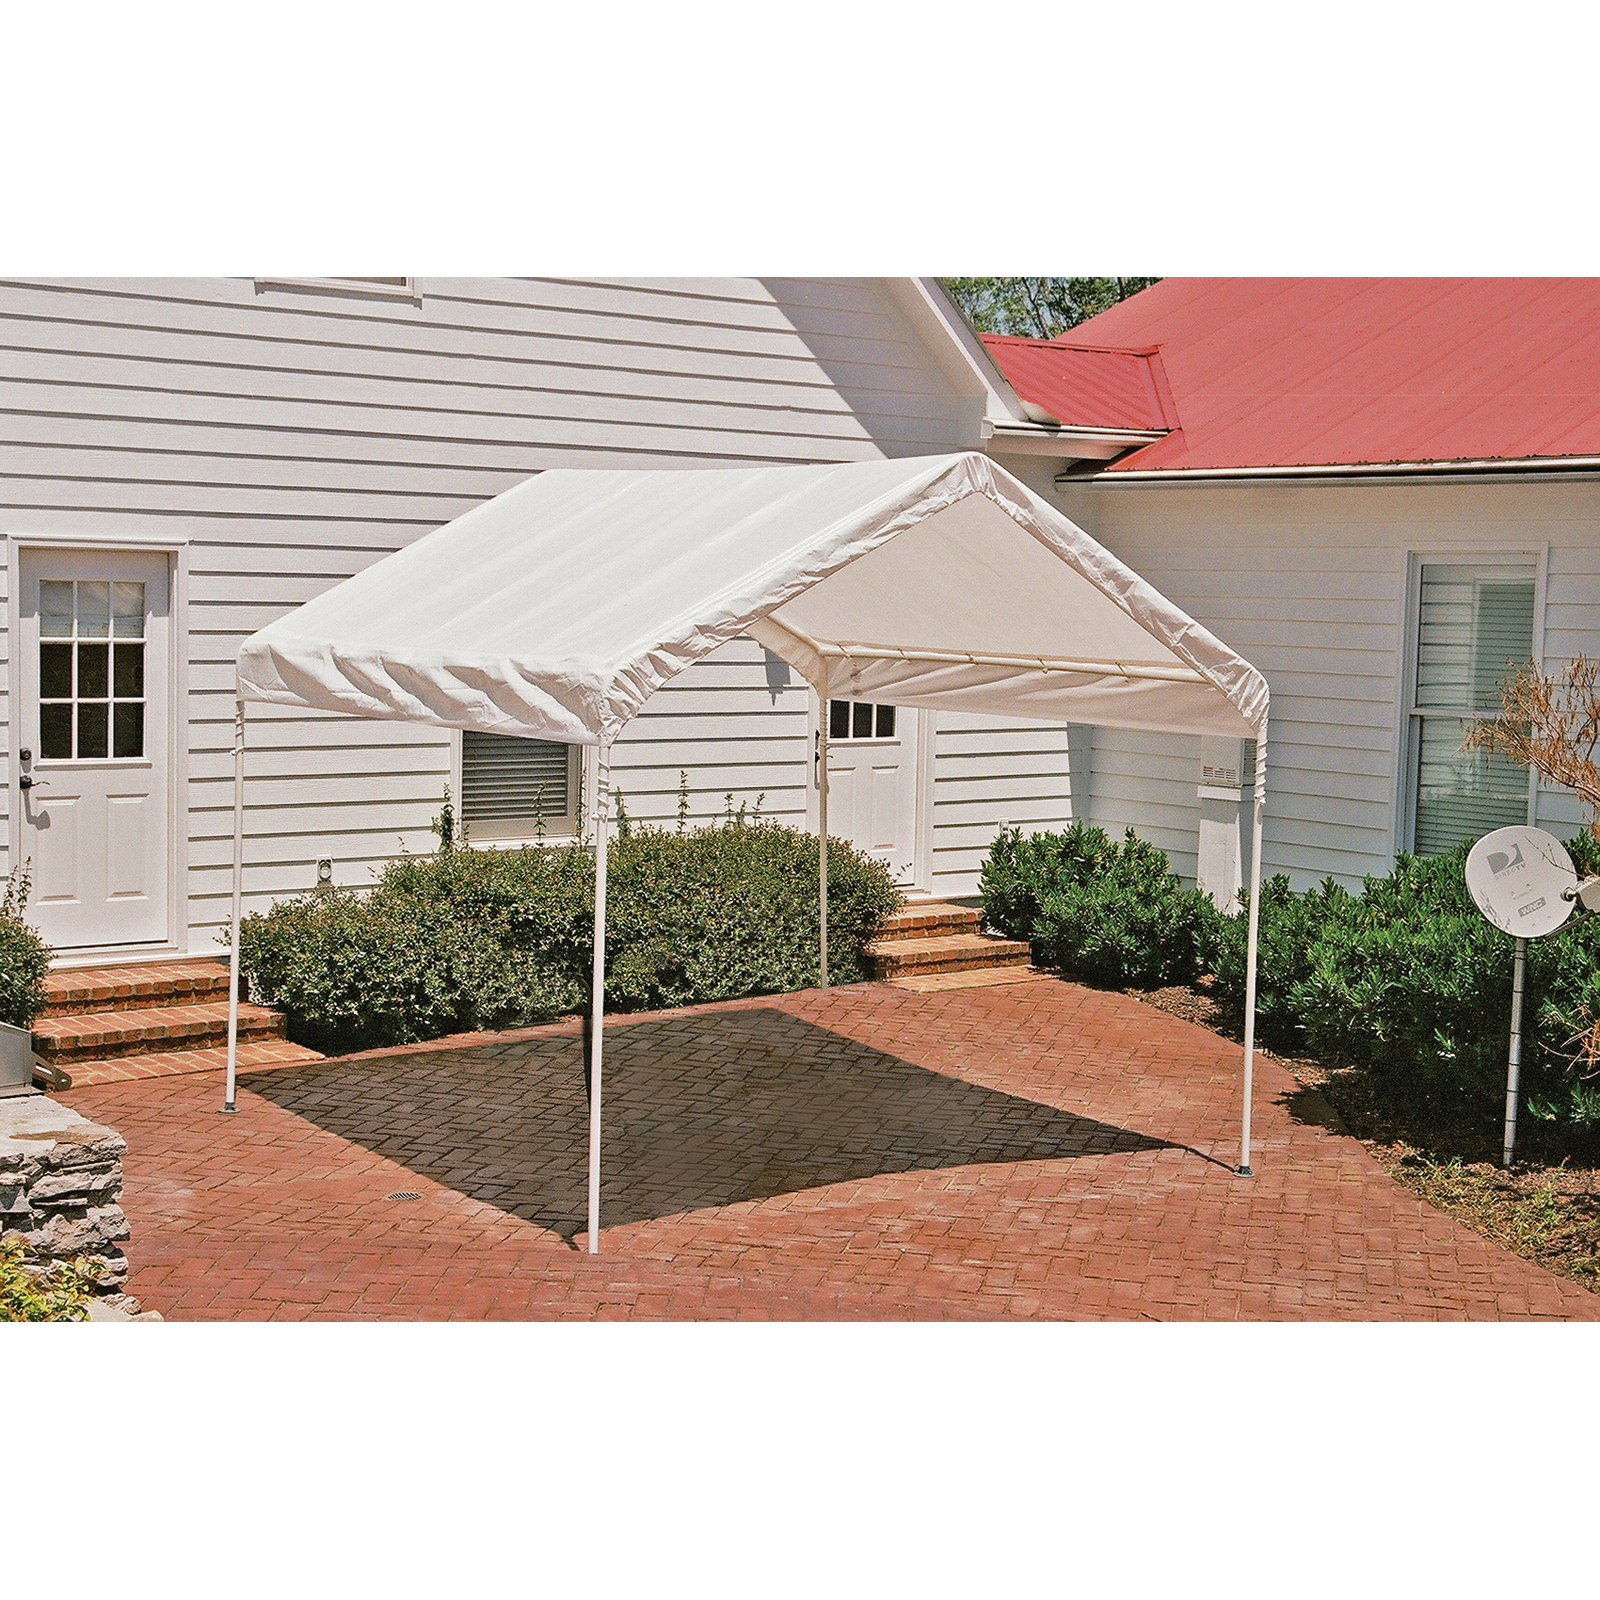 Max AP Compact Canopy 10' x 10'-White